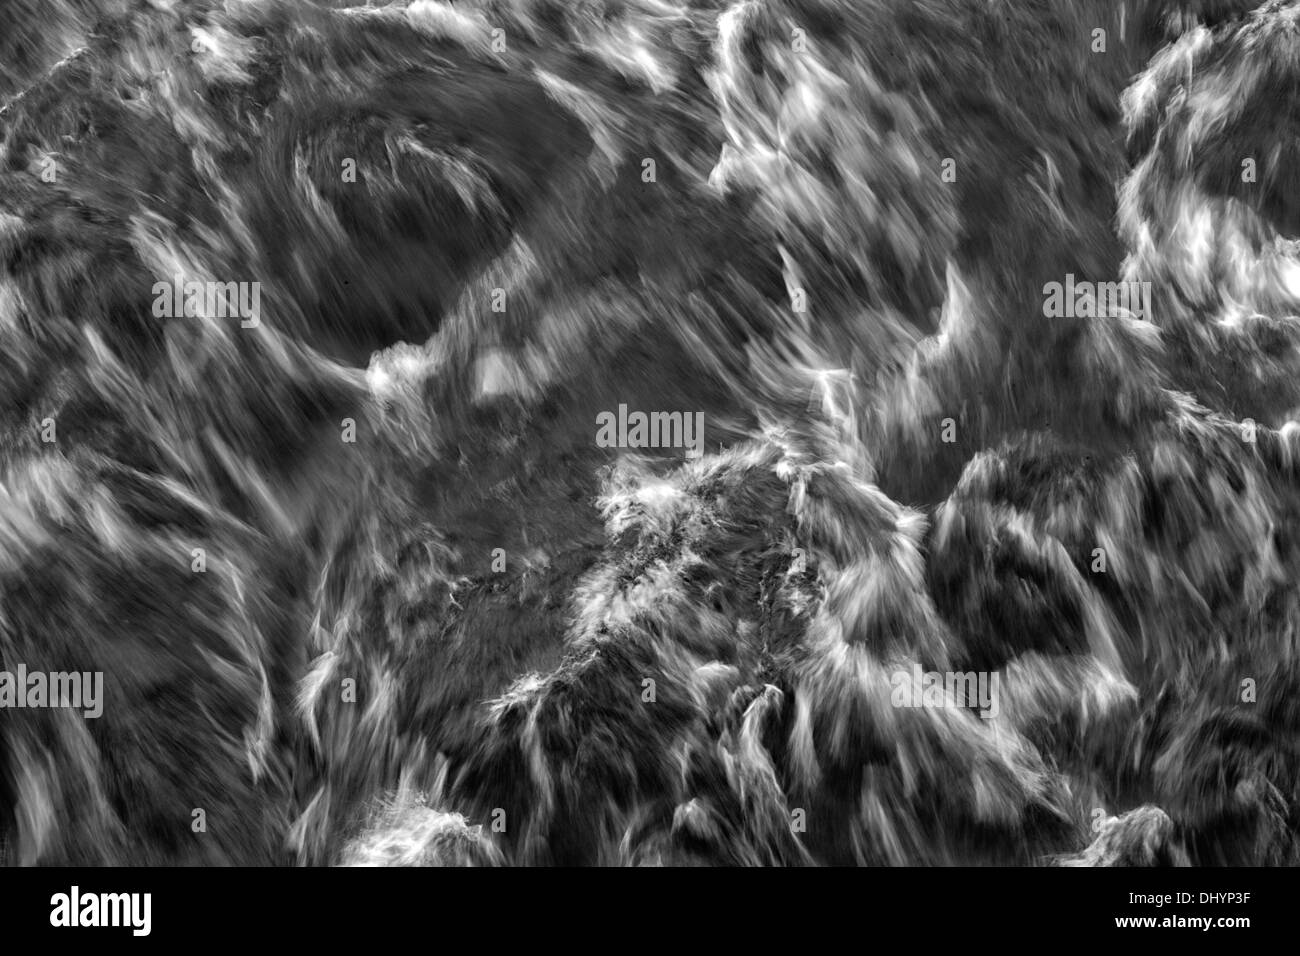 Seas water Black and White Stock Photos & Images - Alamy